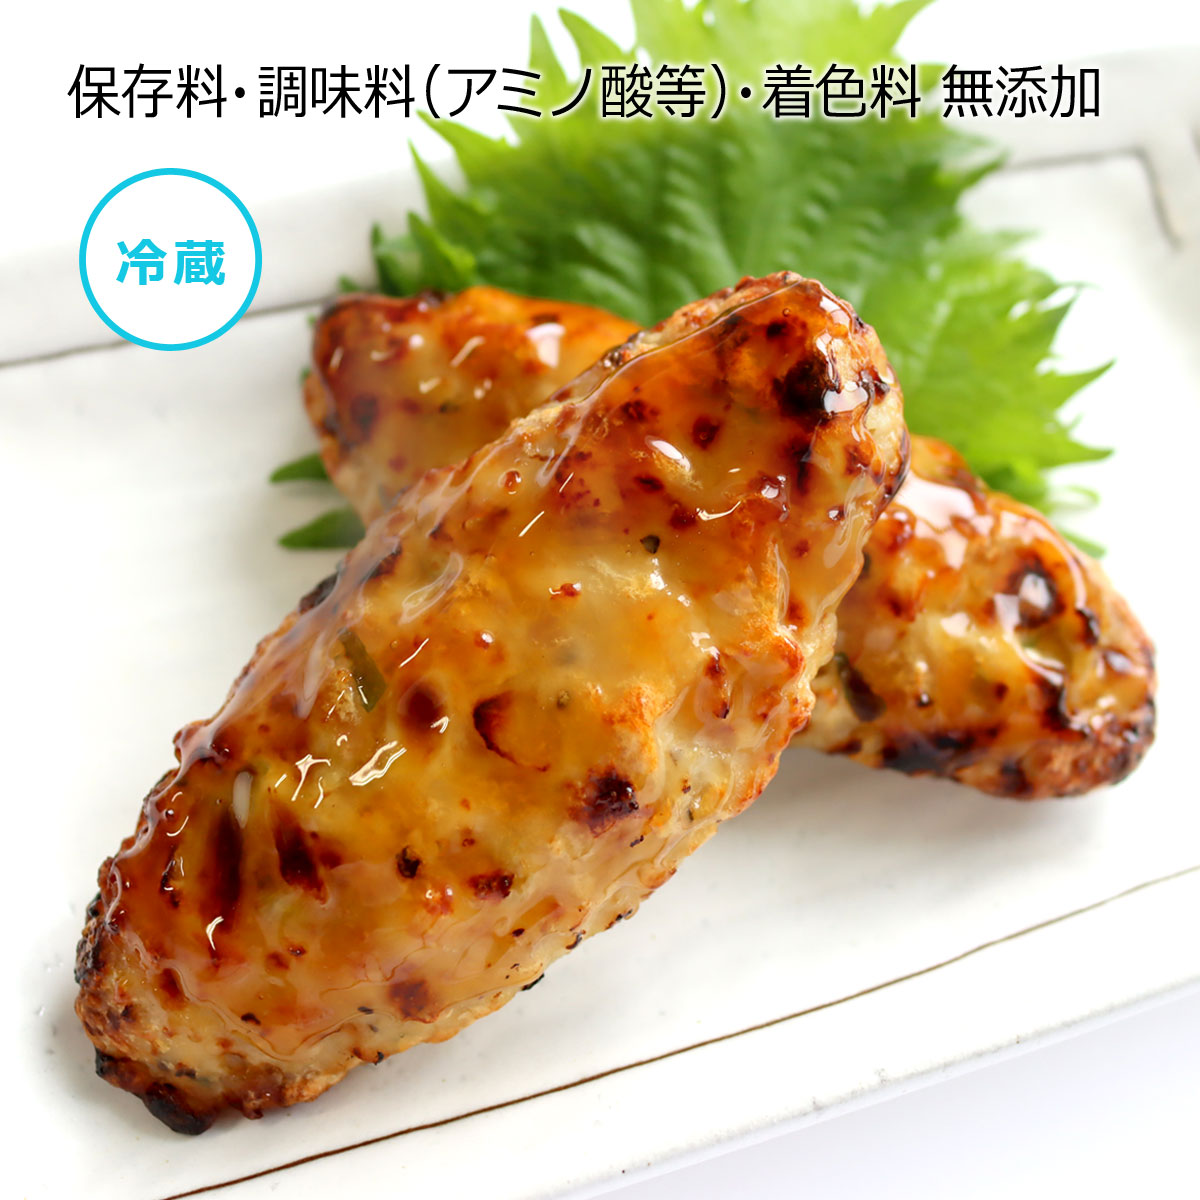 [ official ].. shop domestic production chicken ... refrigeration |... handmade no addition health daily dish side dish . present your order gourmet Japanese food vacuum pack gift present Father's day 